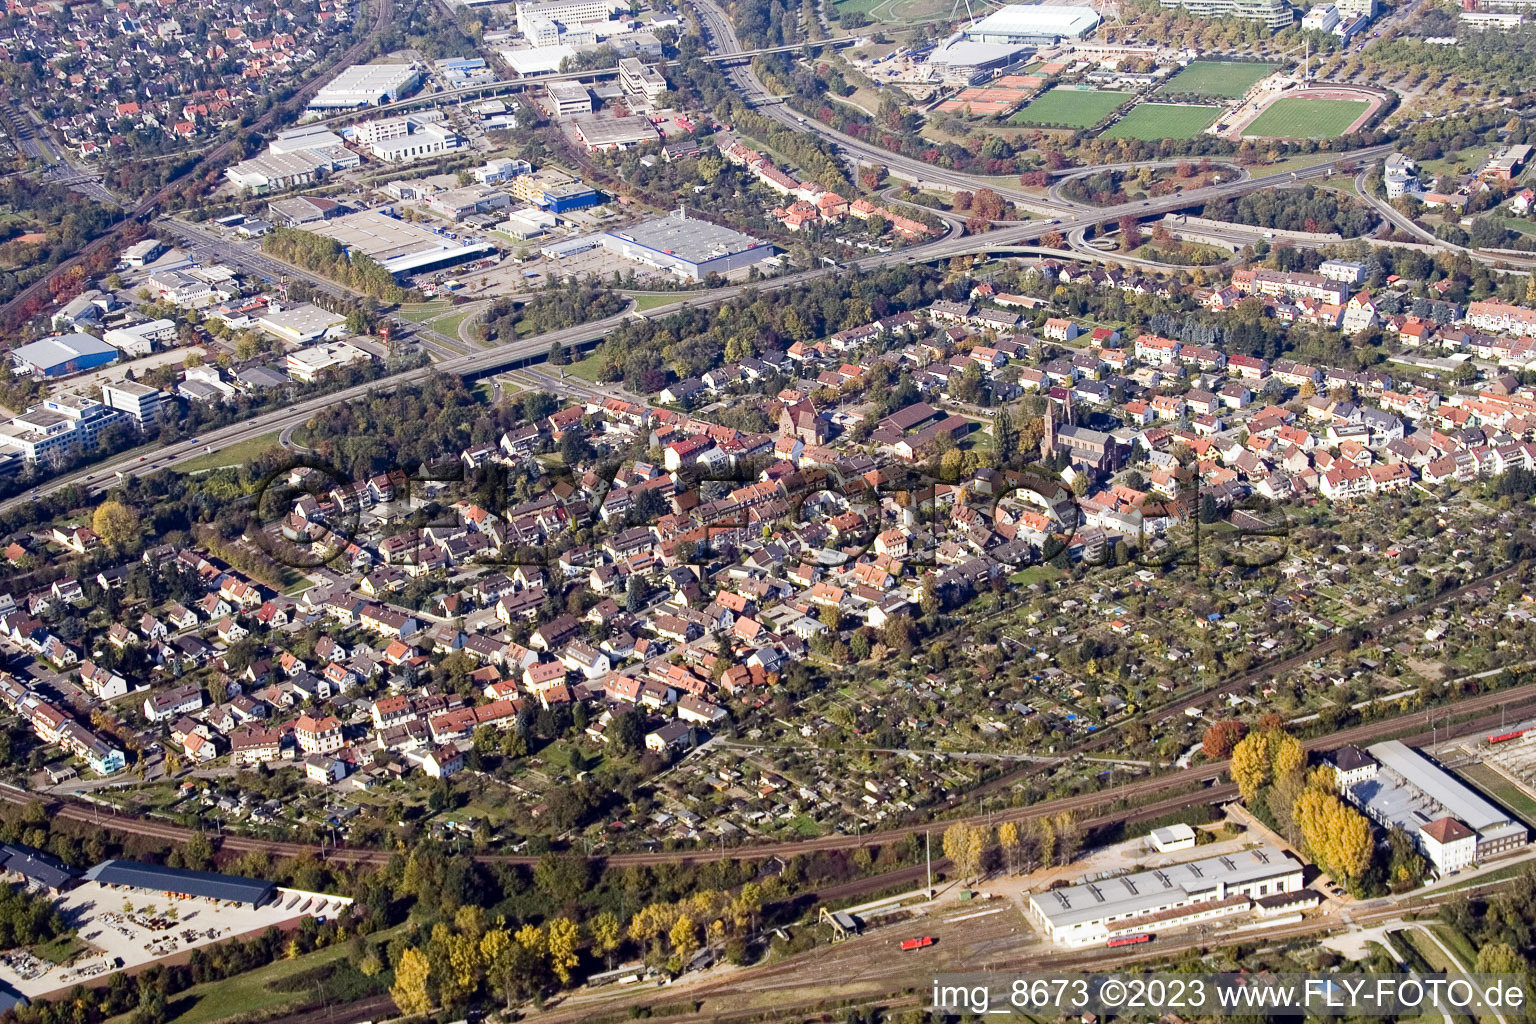 District Beiertheim-Bulach in Karlsruhe in the state Baden-Wuerttemberg, Germany viewn from the air